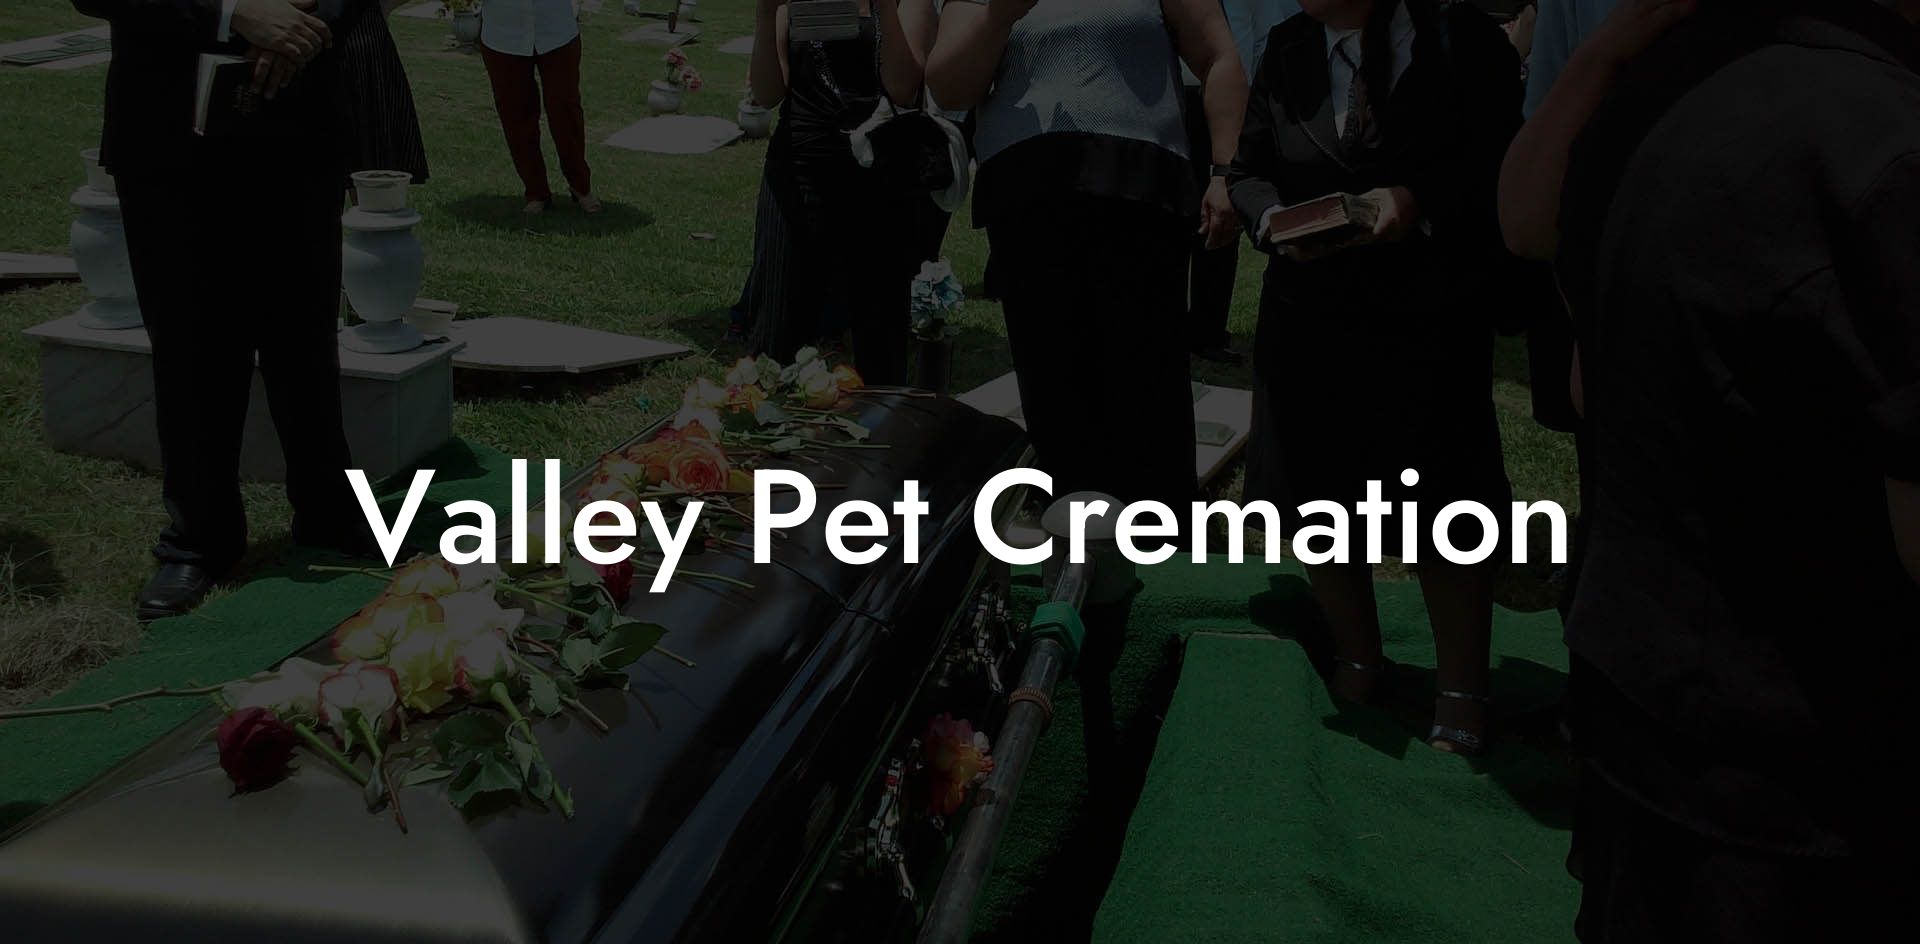 Valley Pet Cremation